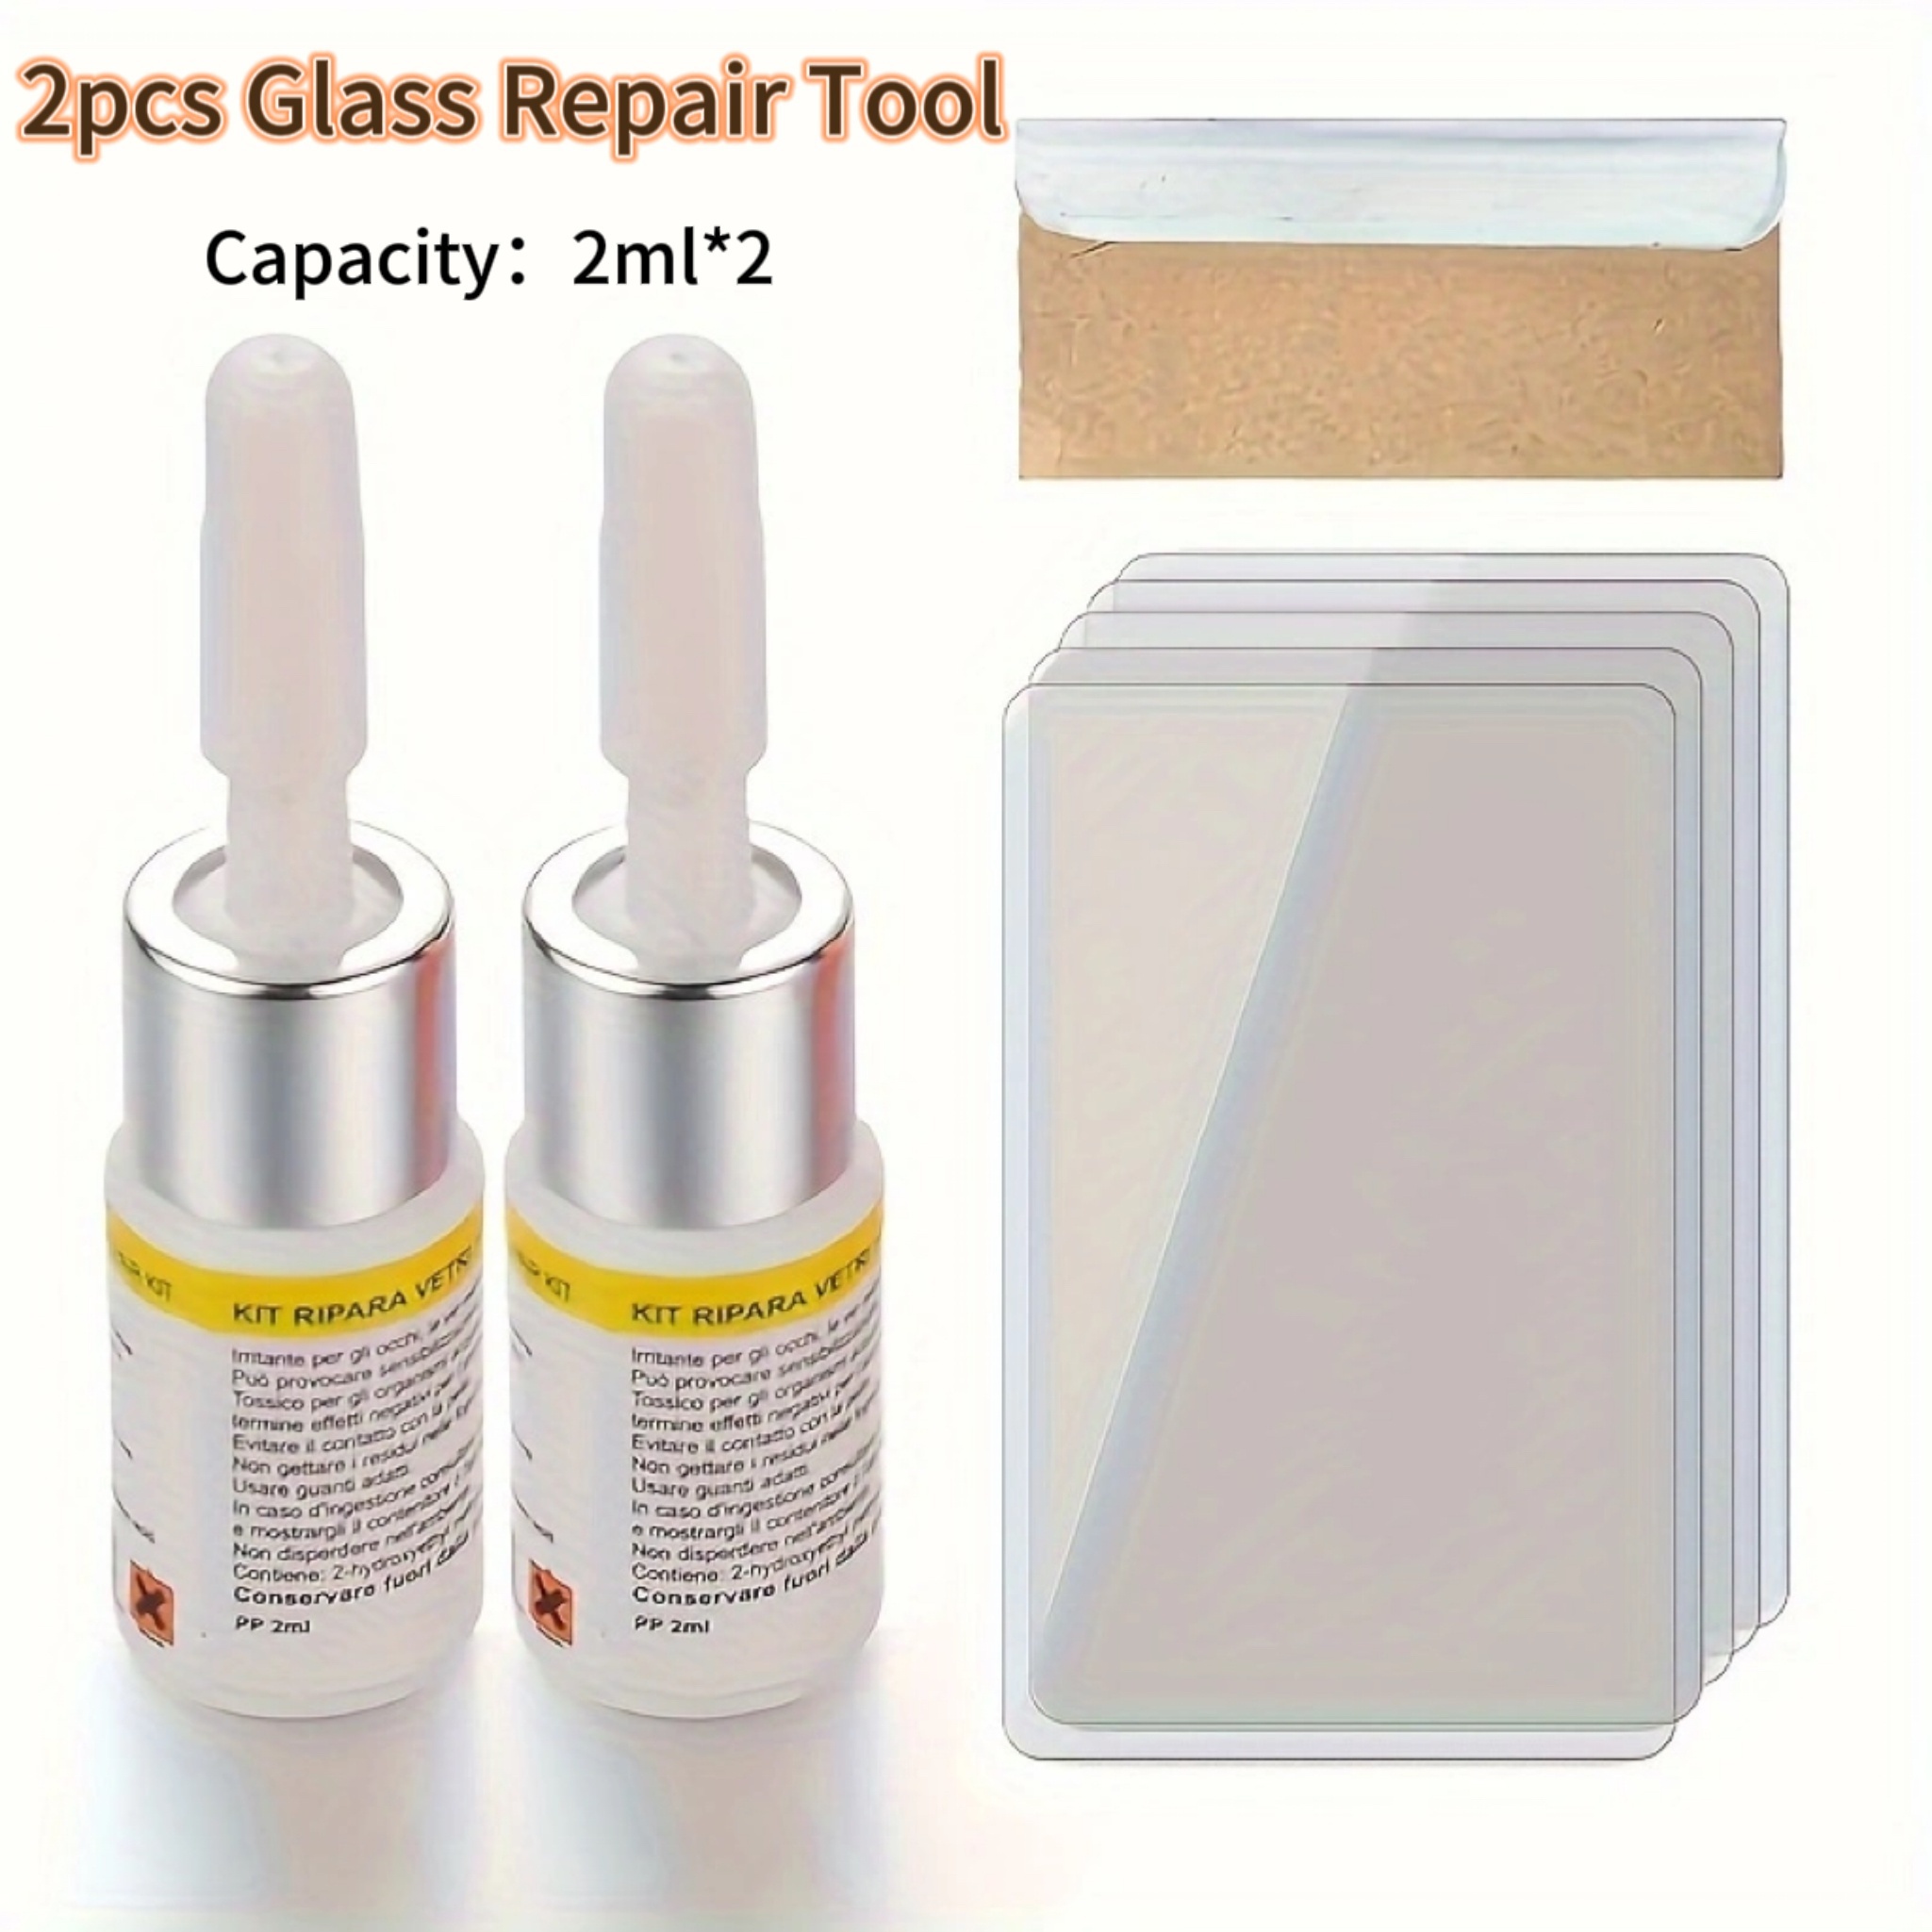 Car Windshield/Glass Crack Repair Tool Glass Scratch Remover (Pack of 2)  Car Maintenance Products